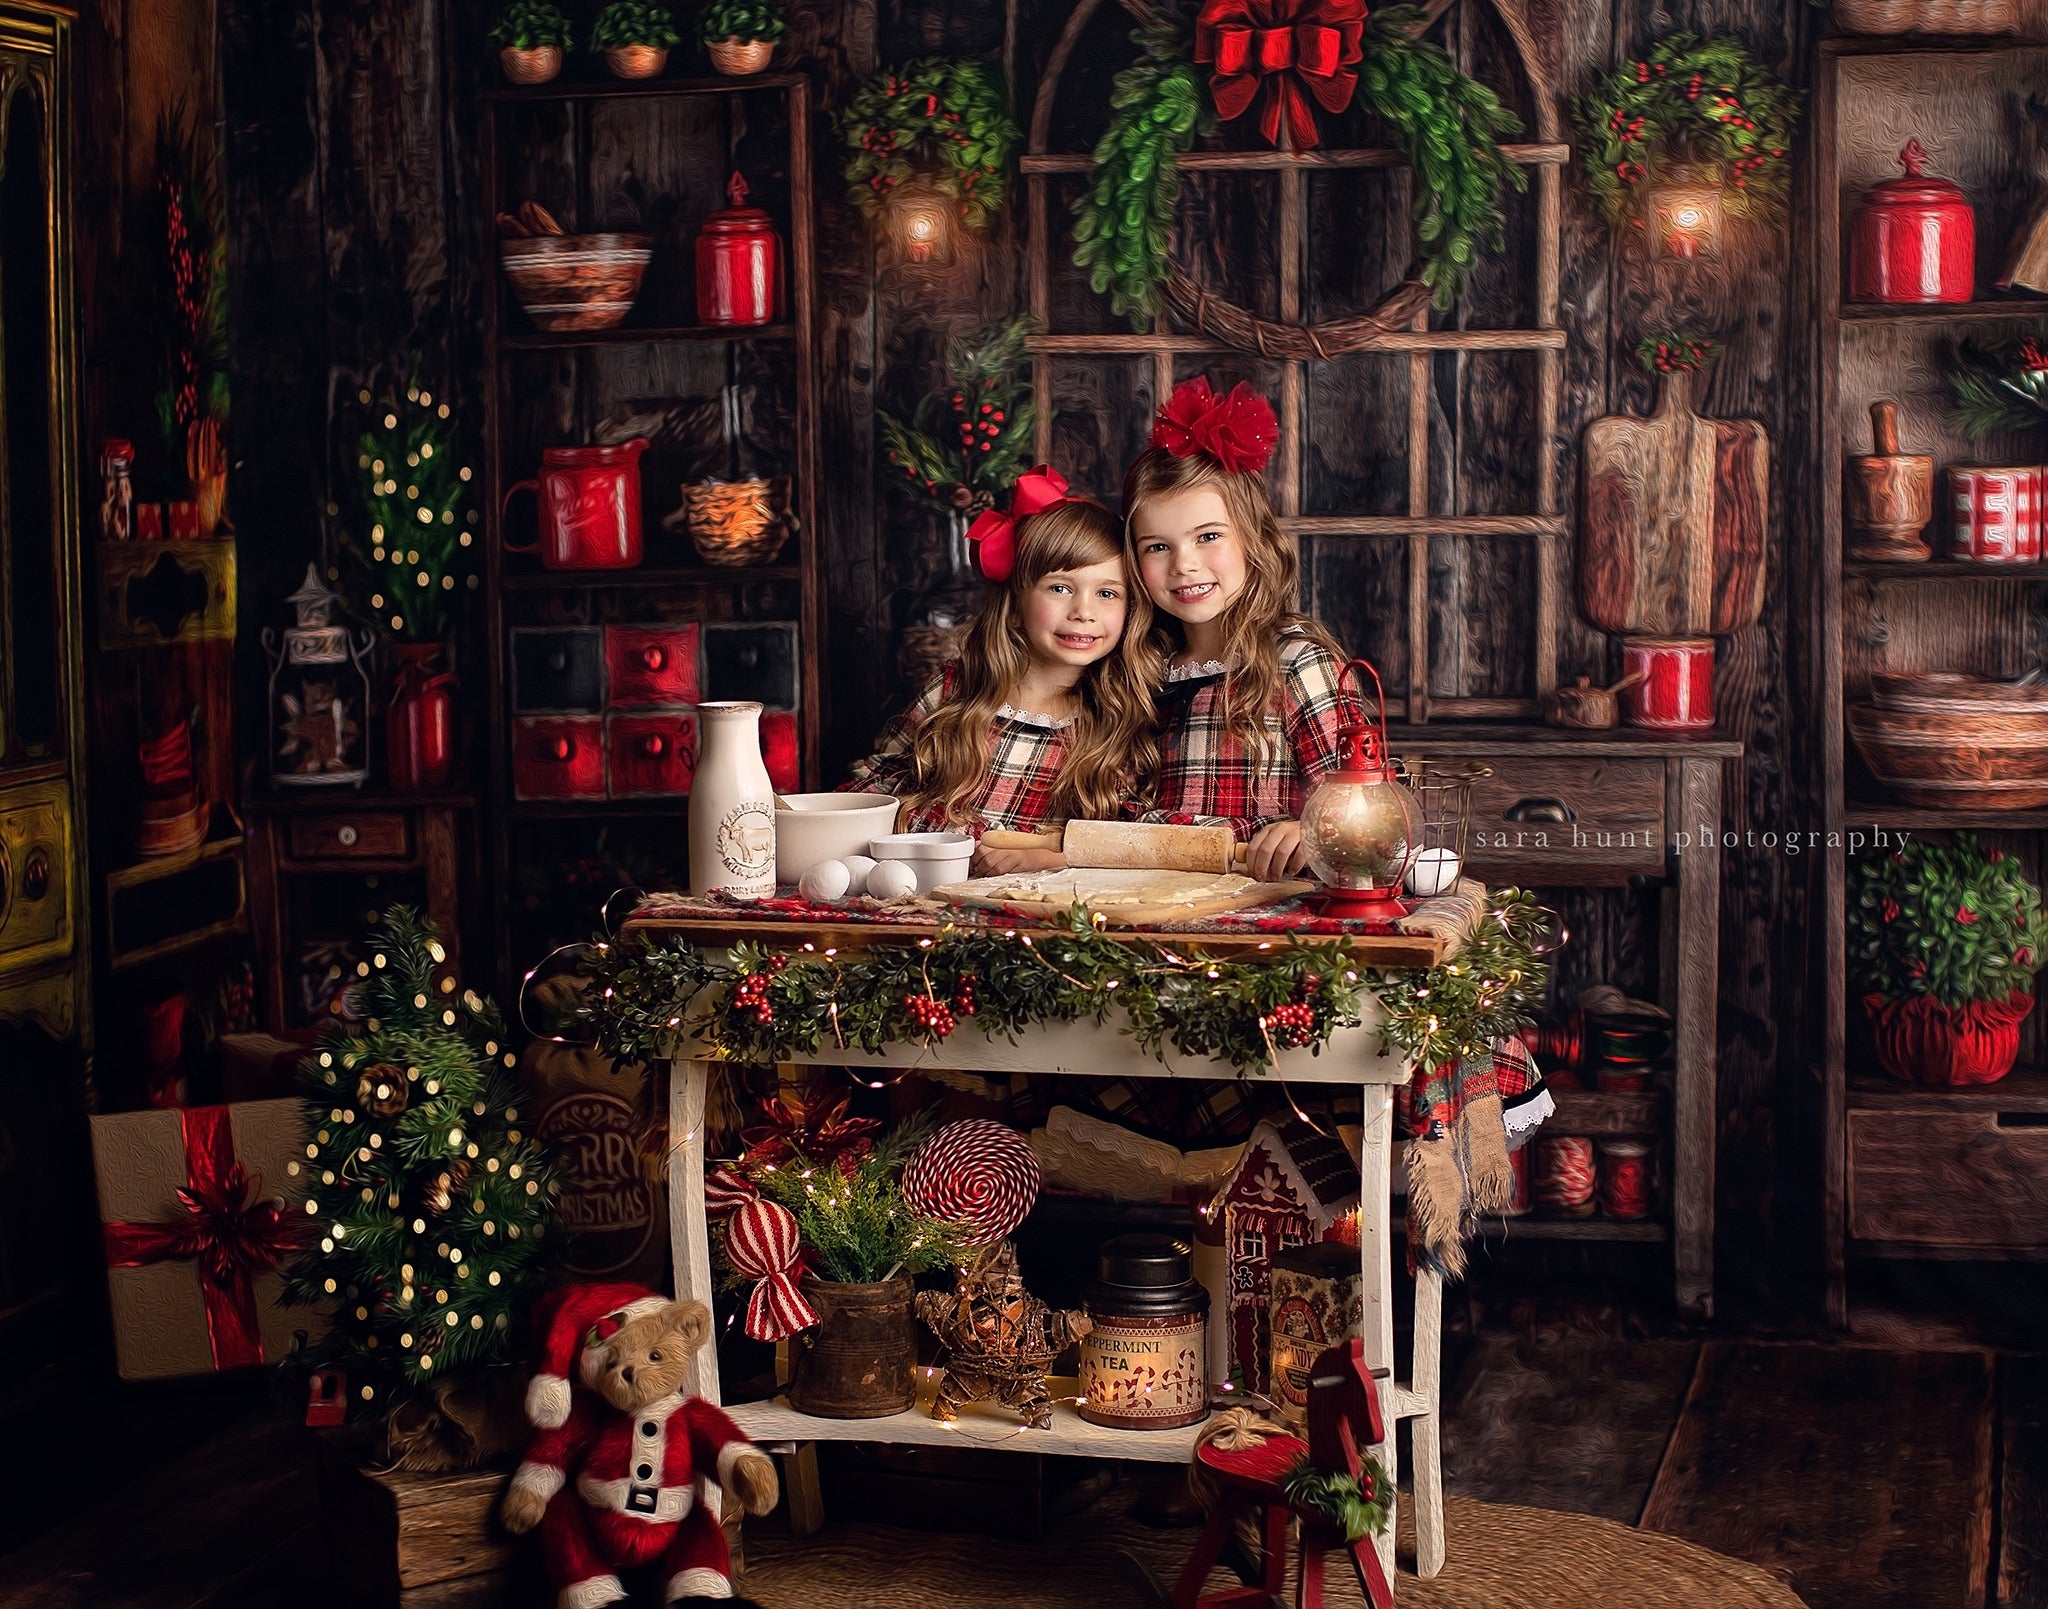 Rustic Christmas Confectionery – Fancy Fabric & Props